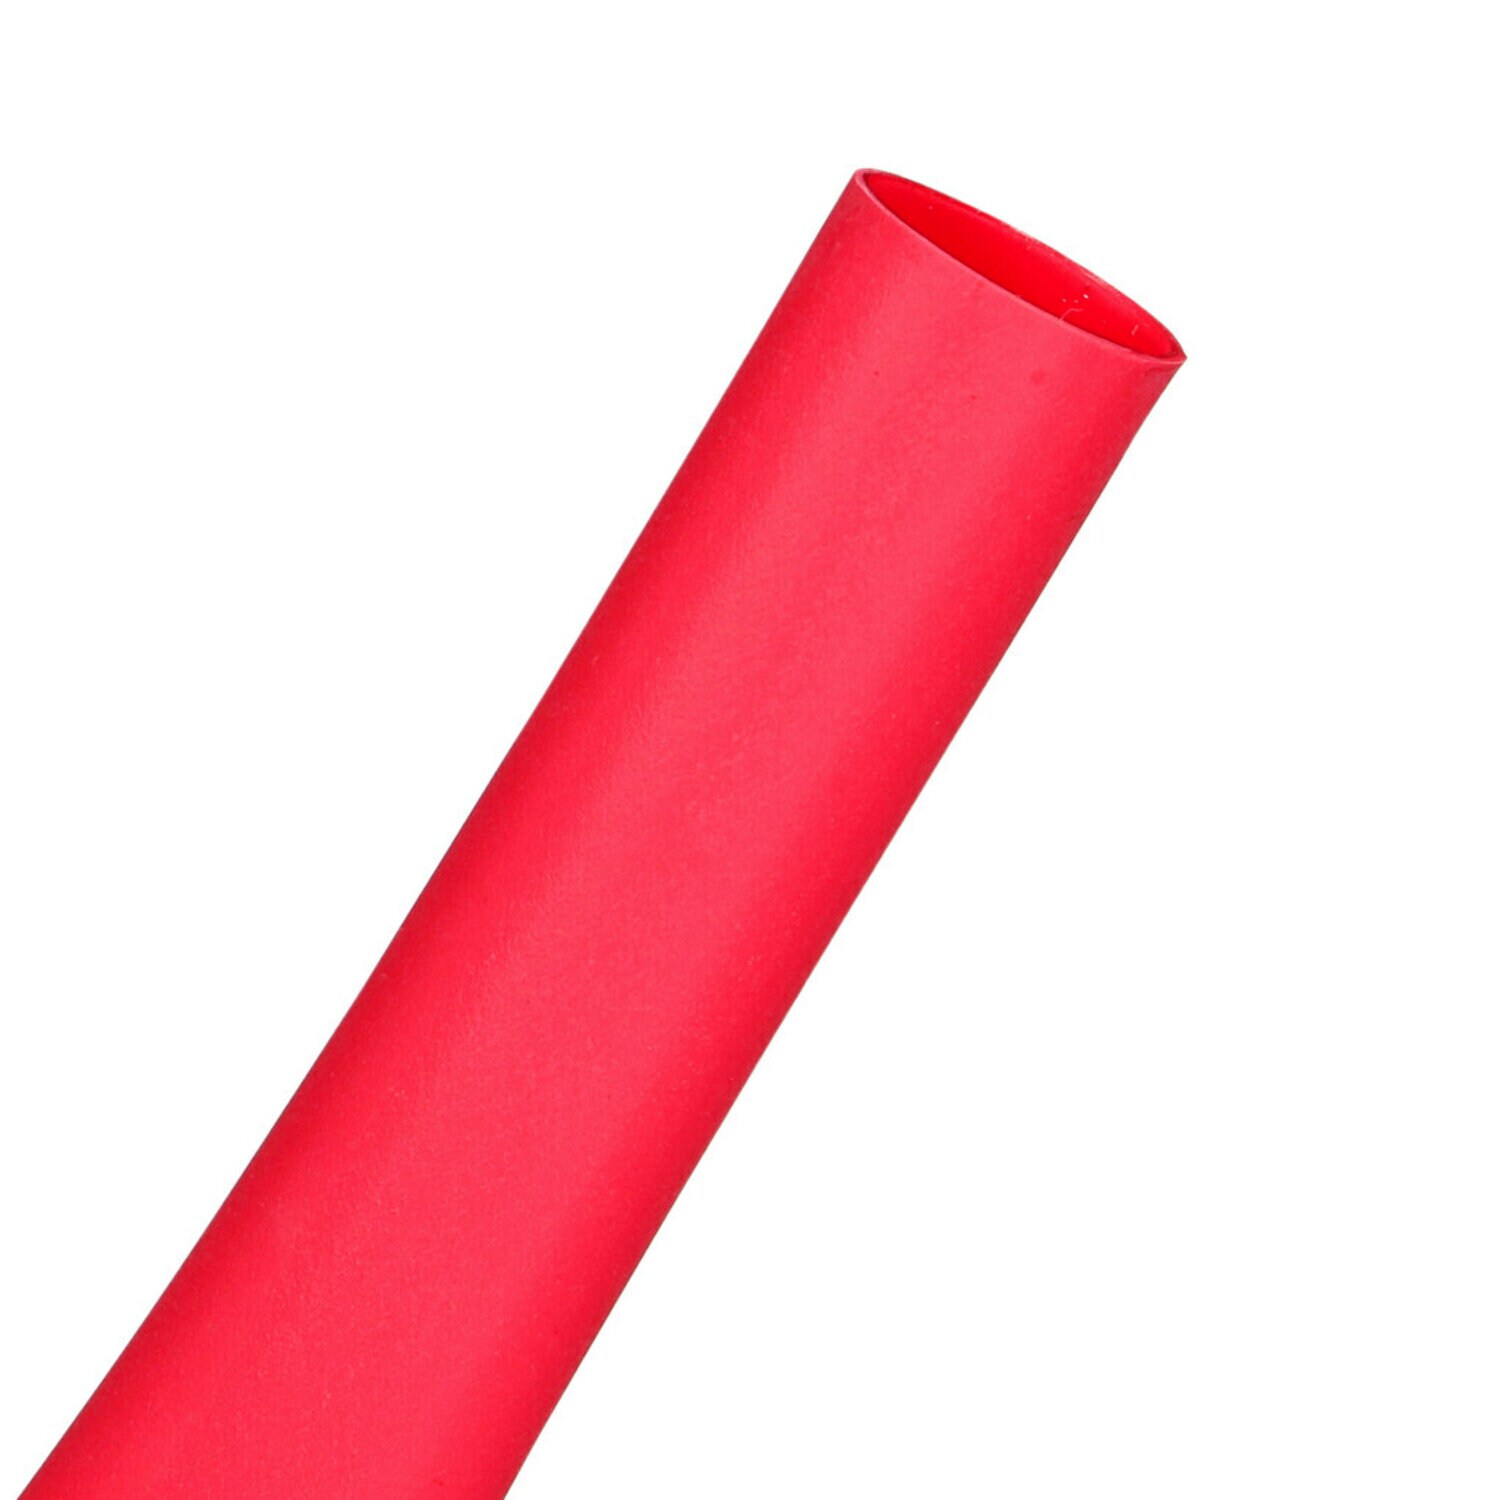 7010398854 - 3M Thin-Wall Heat Shrink Tubing EPS-300, Adhesive-Lined, 1/4" Red 48-in
sticks, 200/Case